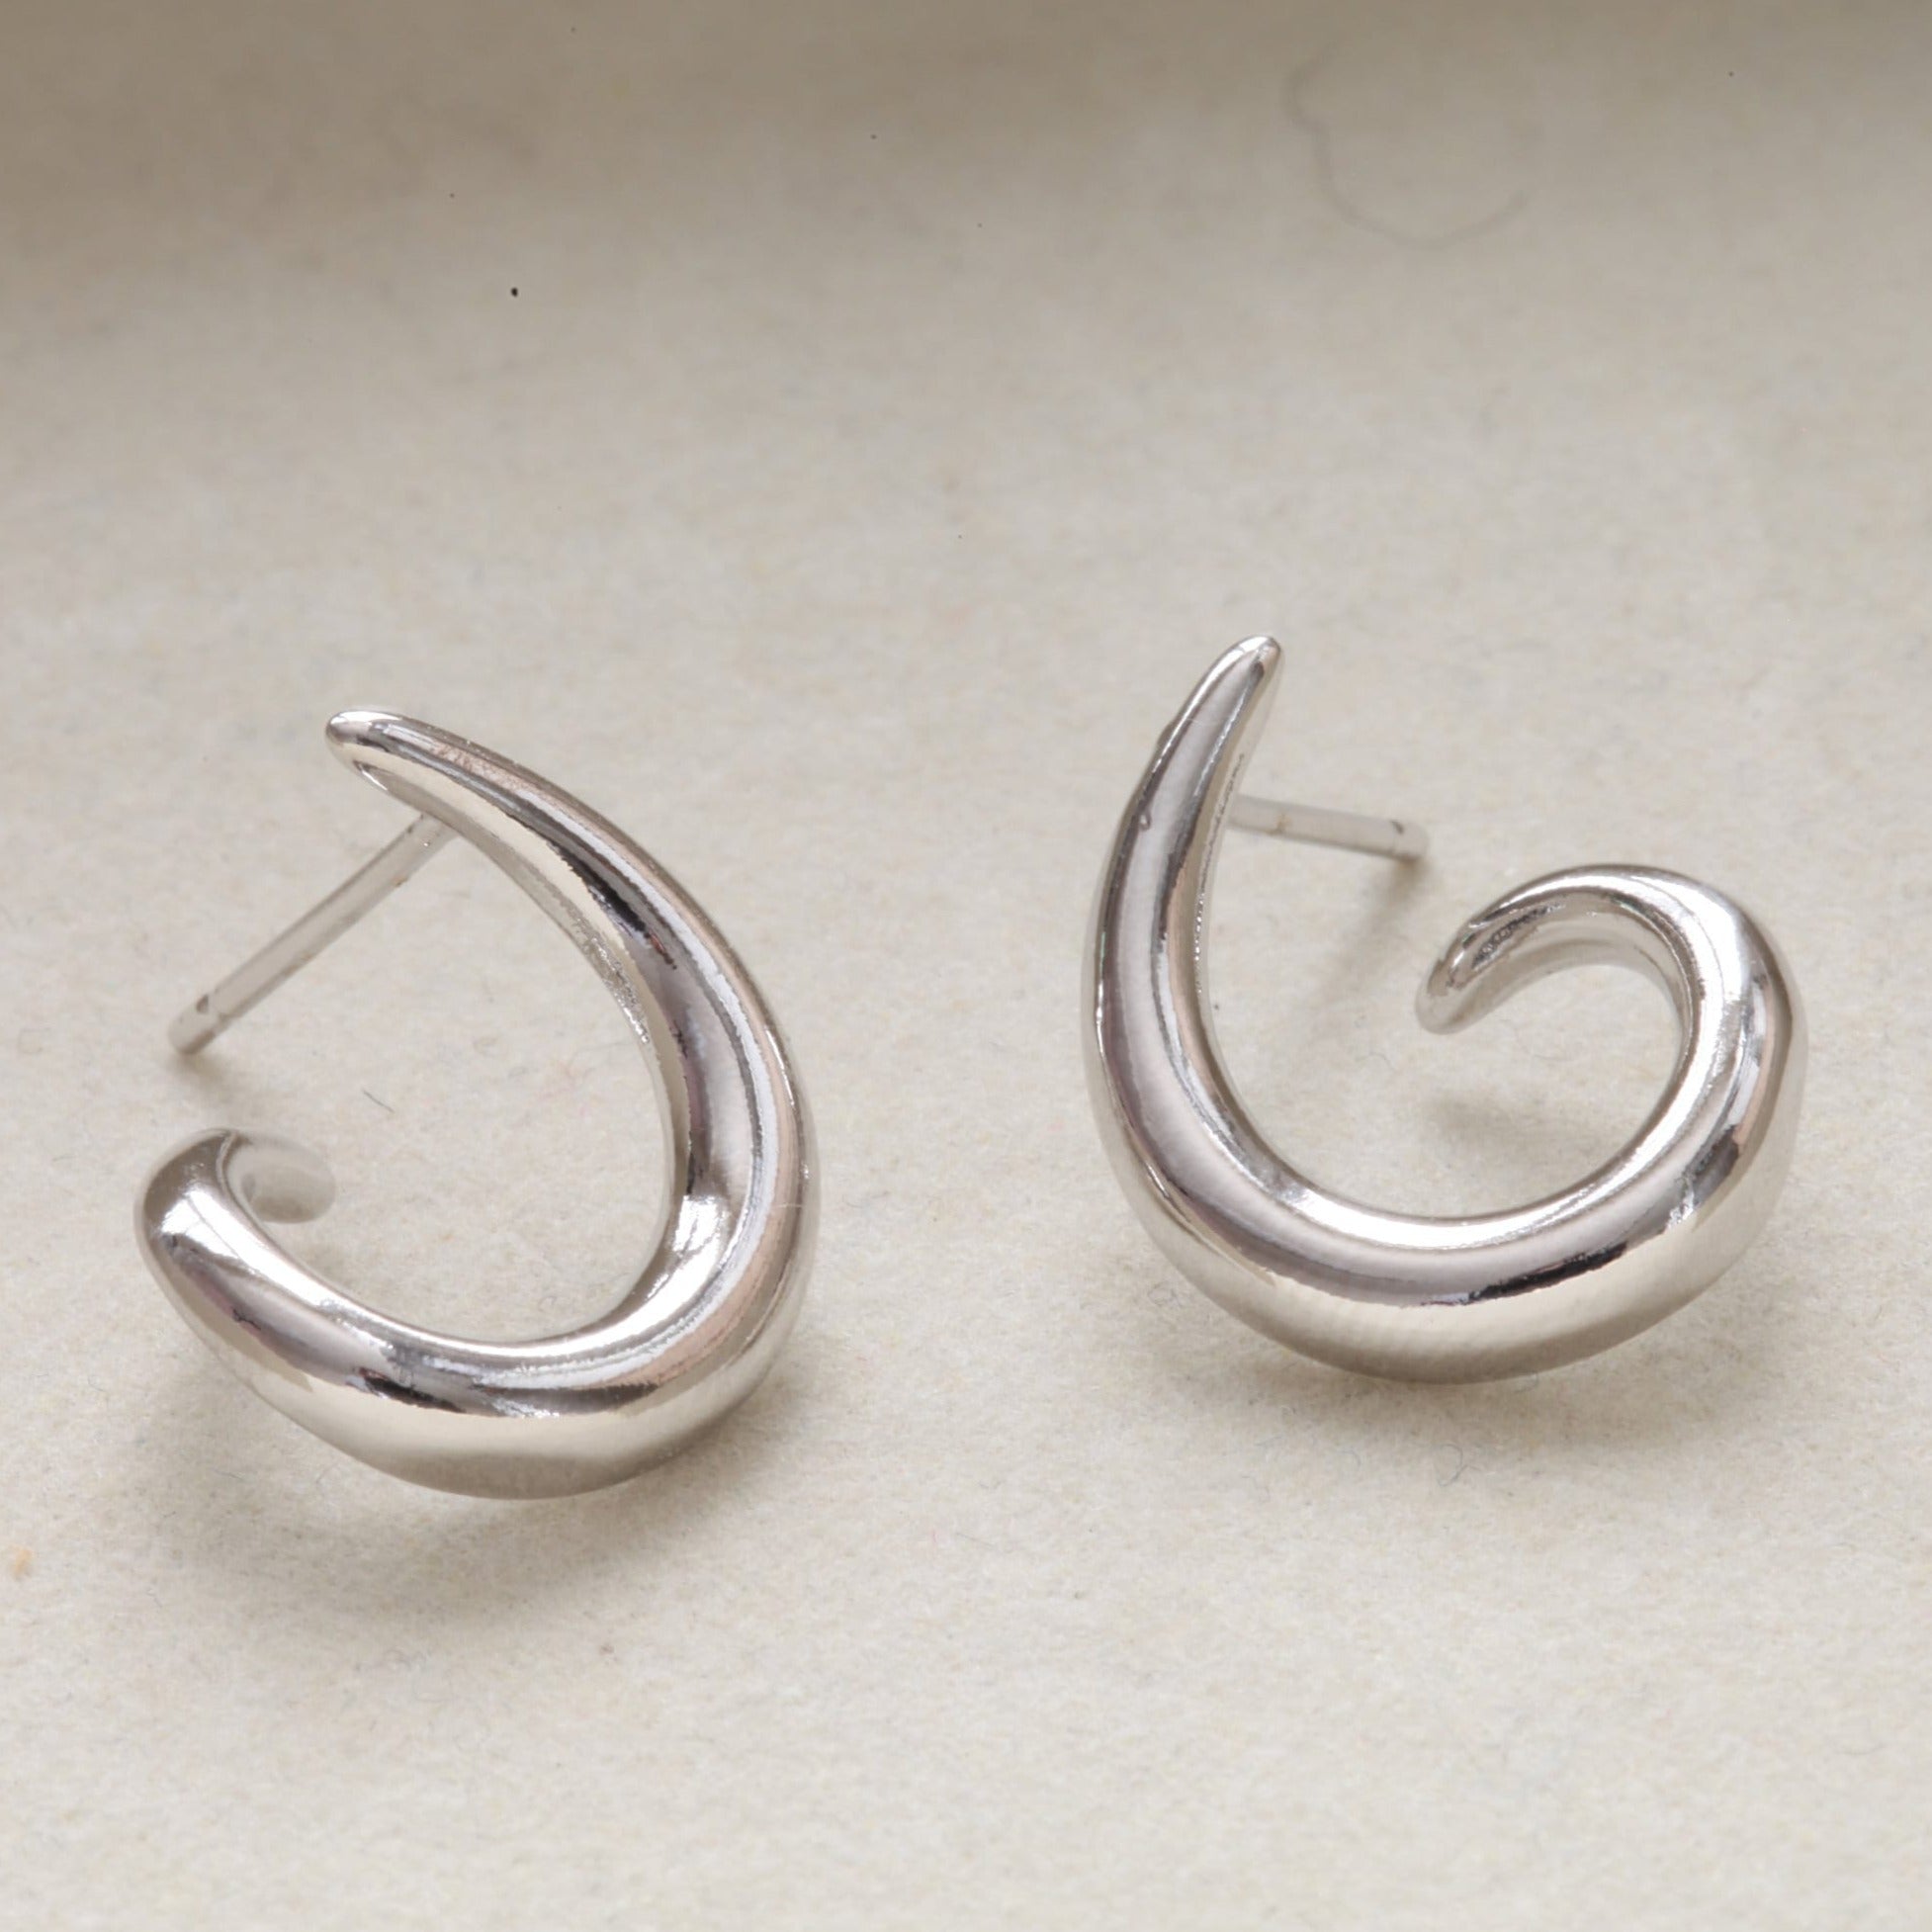 Silver Spiral Stud Earring 16g Silver Spiral Earring Delicate Circle Swirl Stud Geometric Earring Screw Back Earring M Size Large Size L Size - Circle